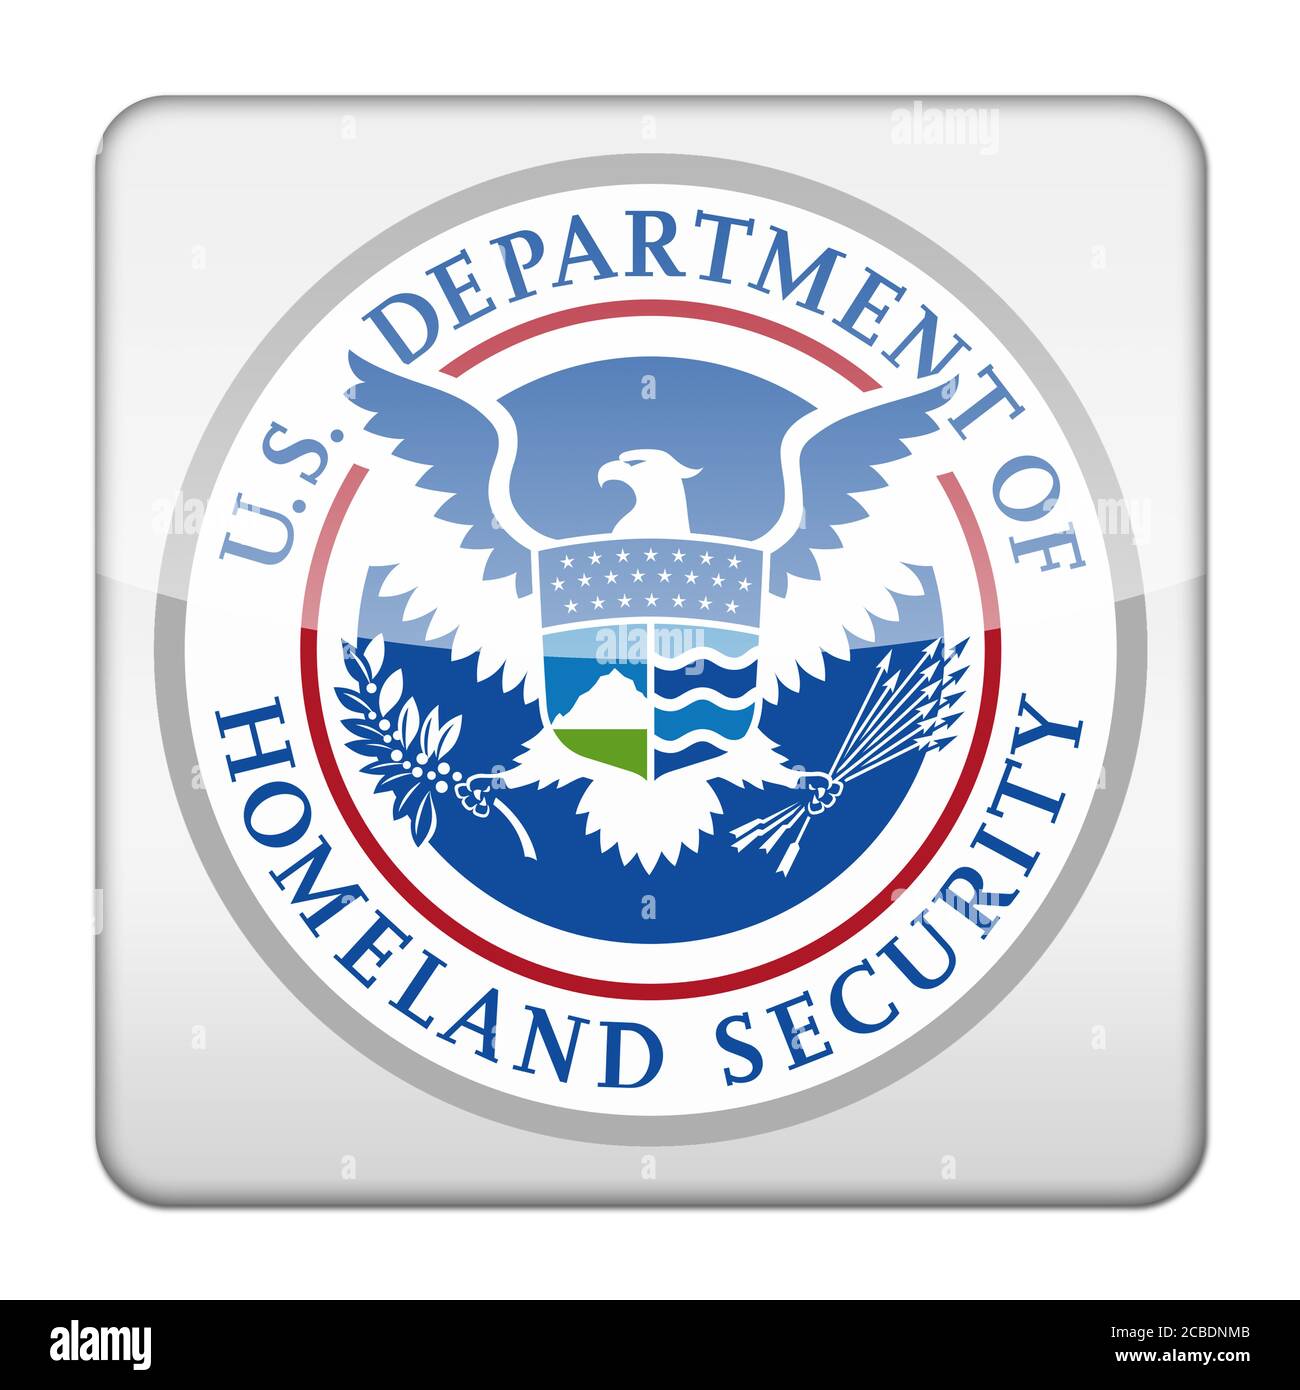 United States Department of Homeland Security Stockfoto